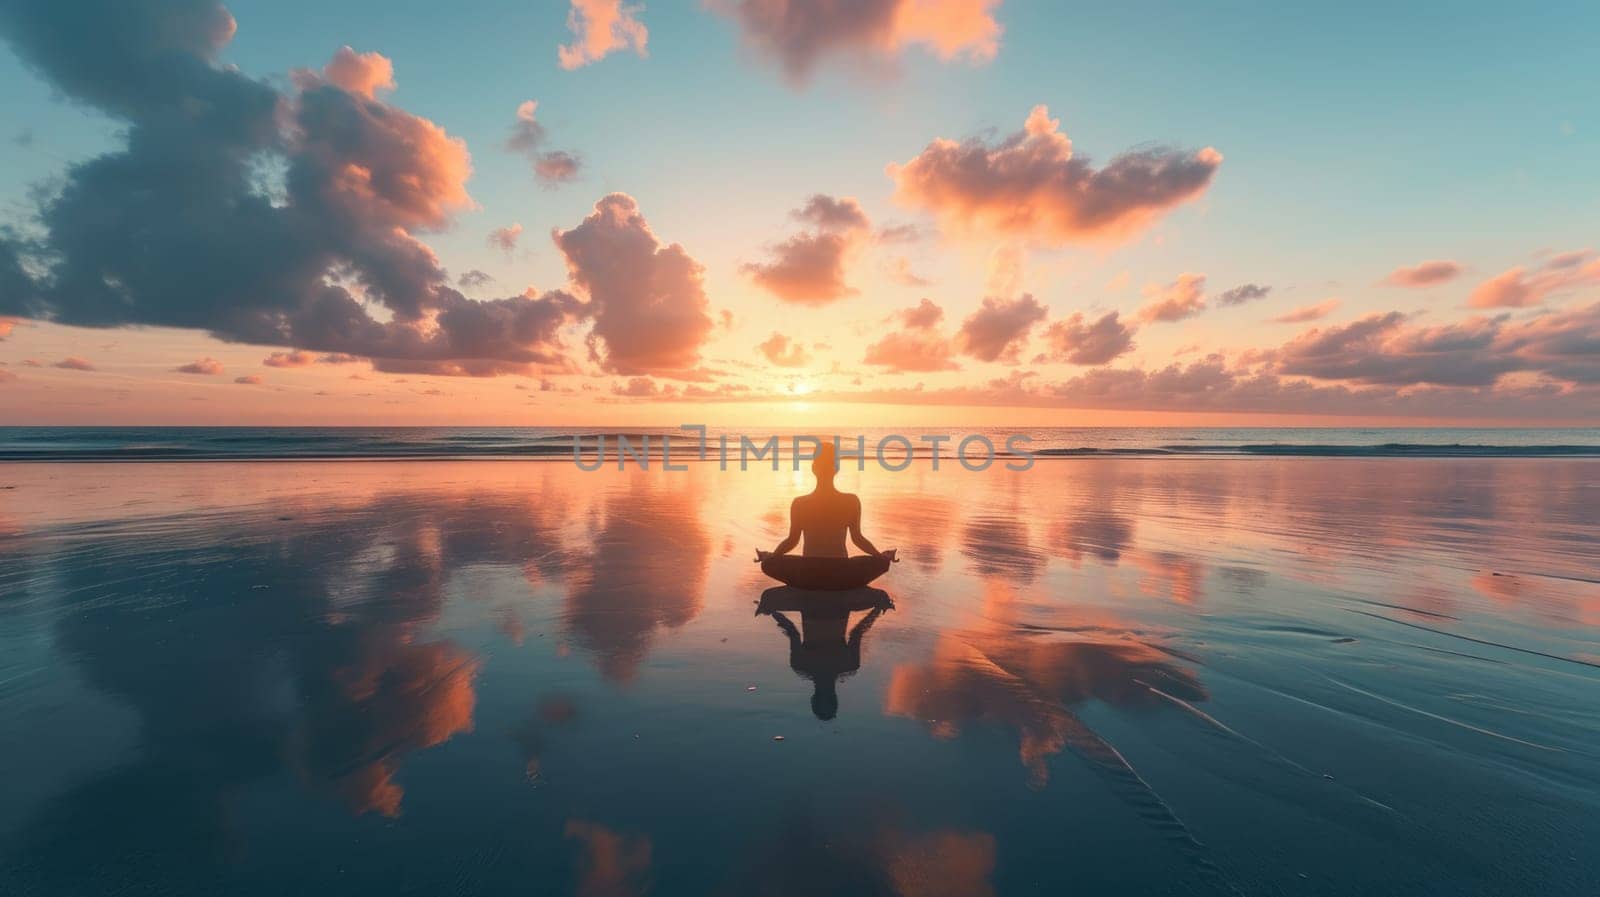 A tranquil yoga session on a beach at sunrise. Resplendent. by biancoblue